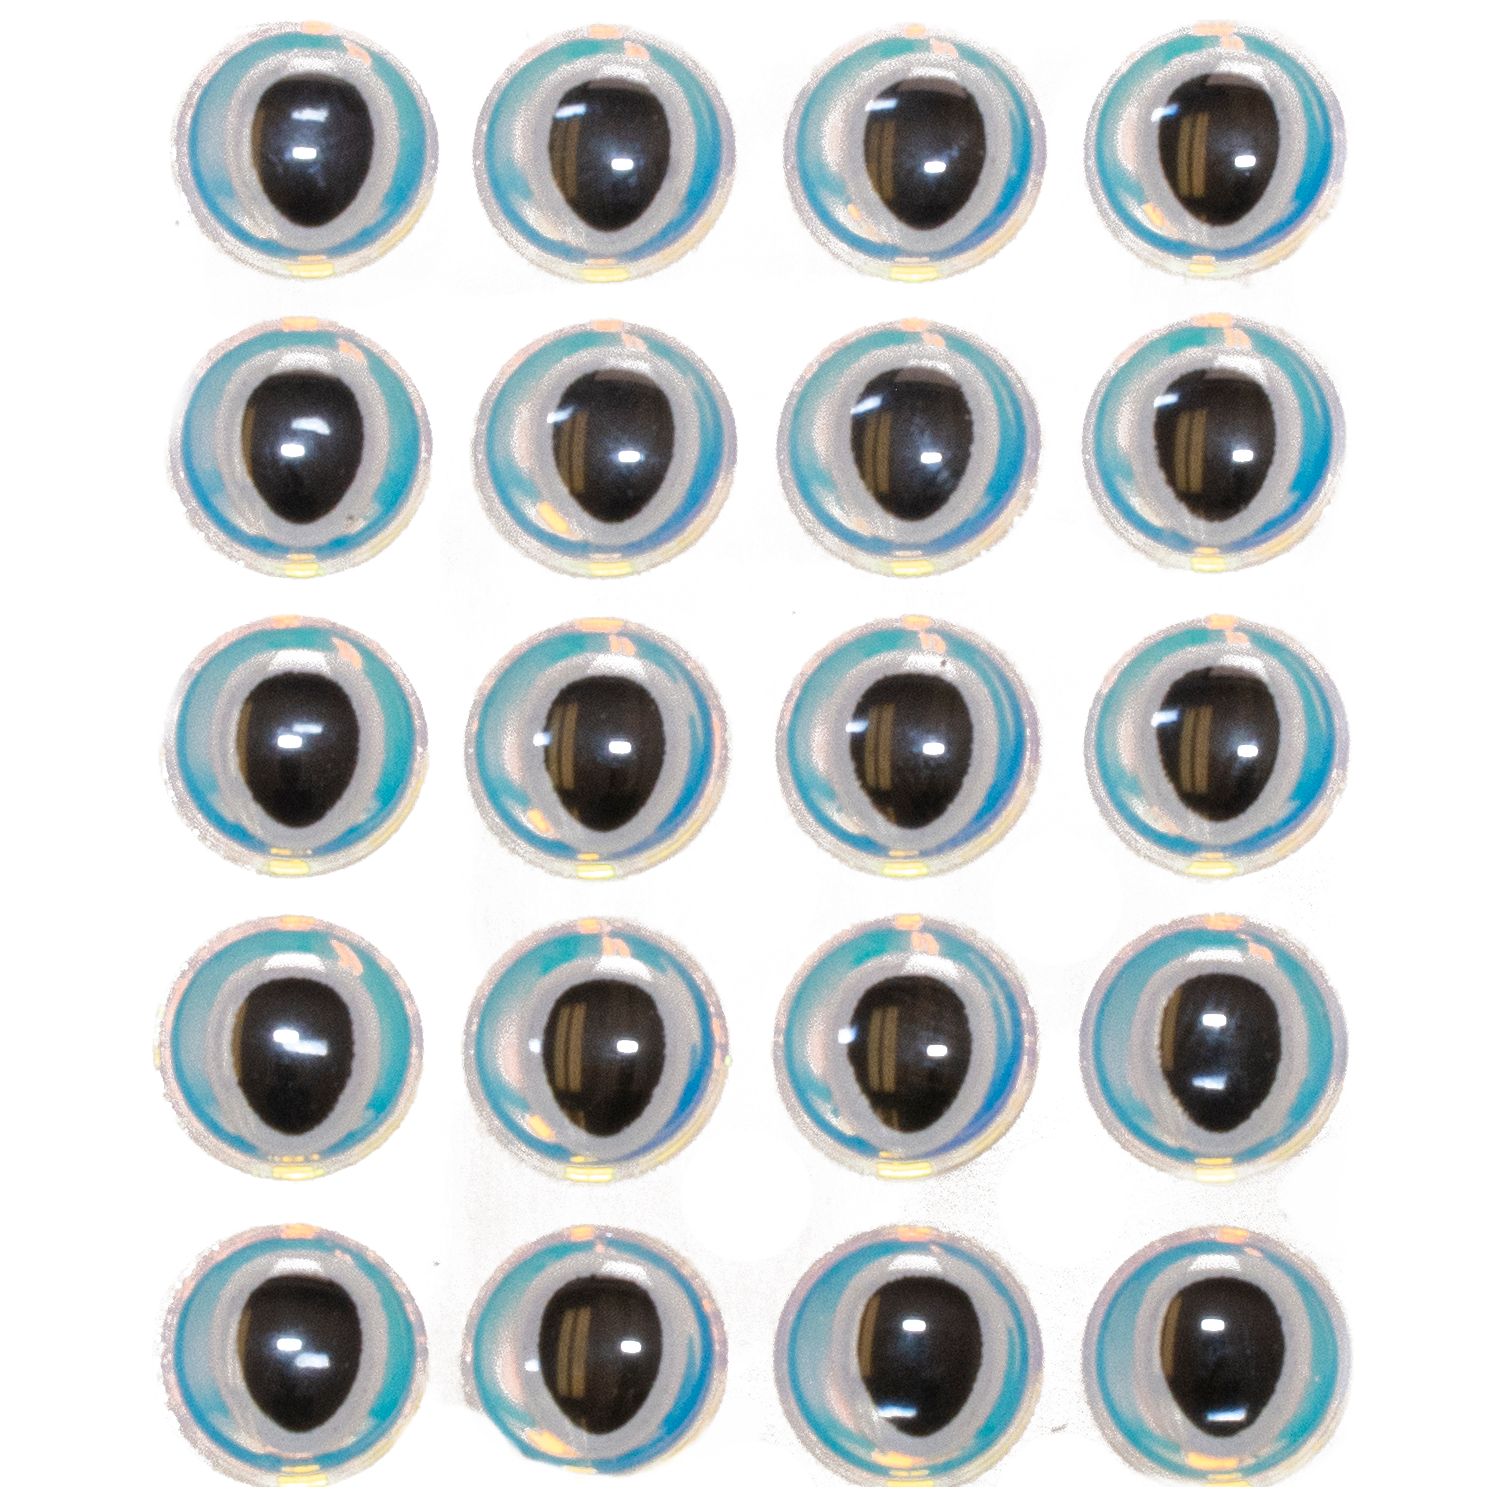 Hareline 1/4 3D Holographic Eyes - Super Pearl